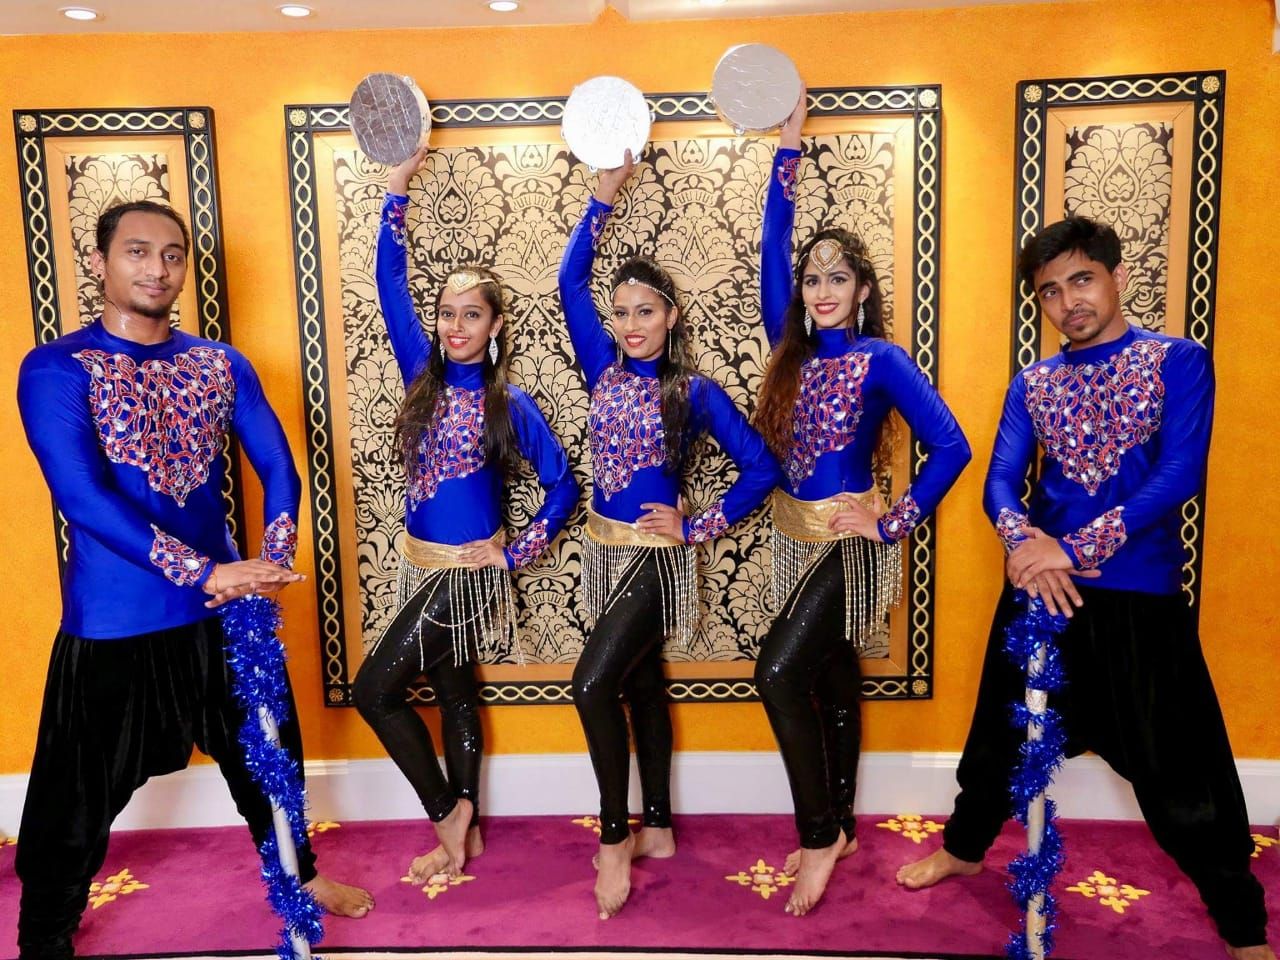 Are you Looking for the best Bollywood Dance Classes?